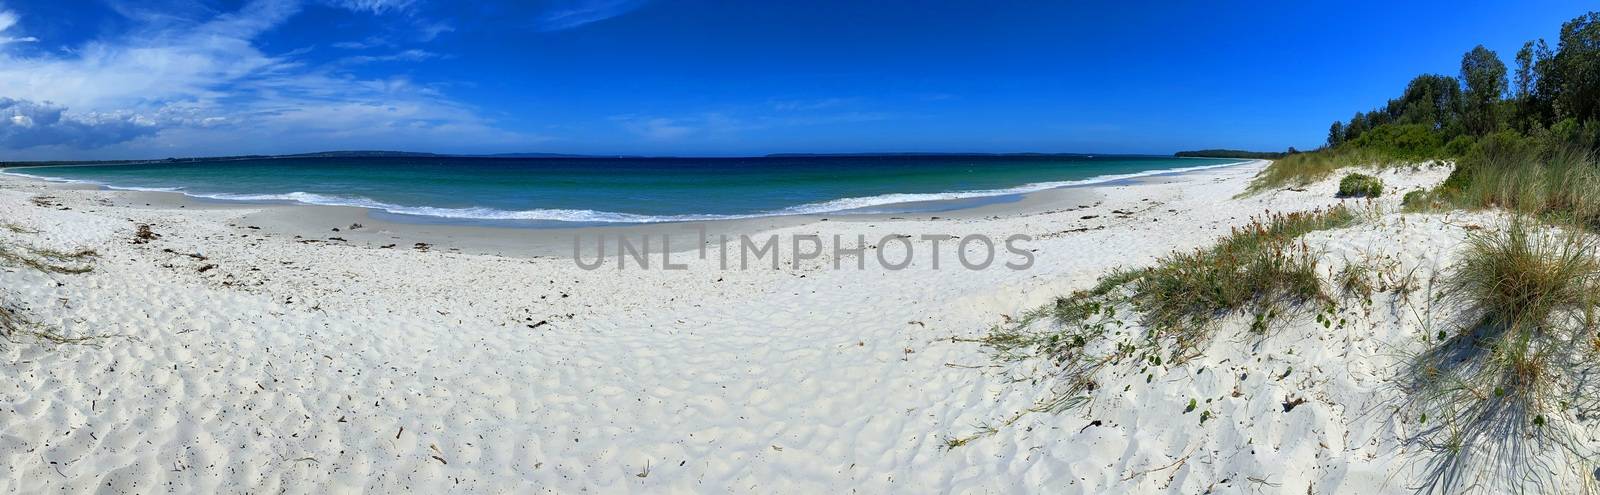 The beach at Jervis Bay, Australia with the whitest sand in the country